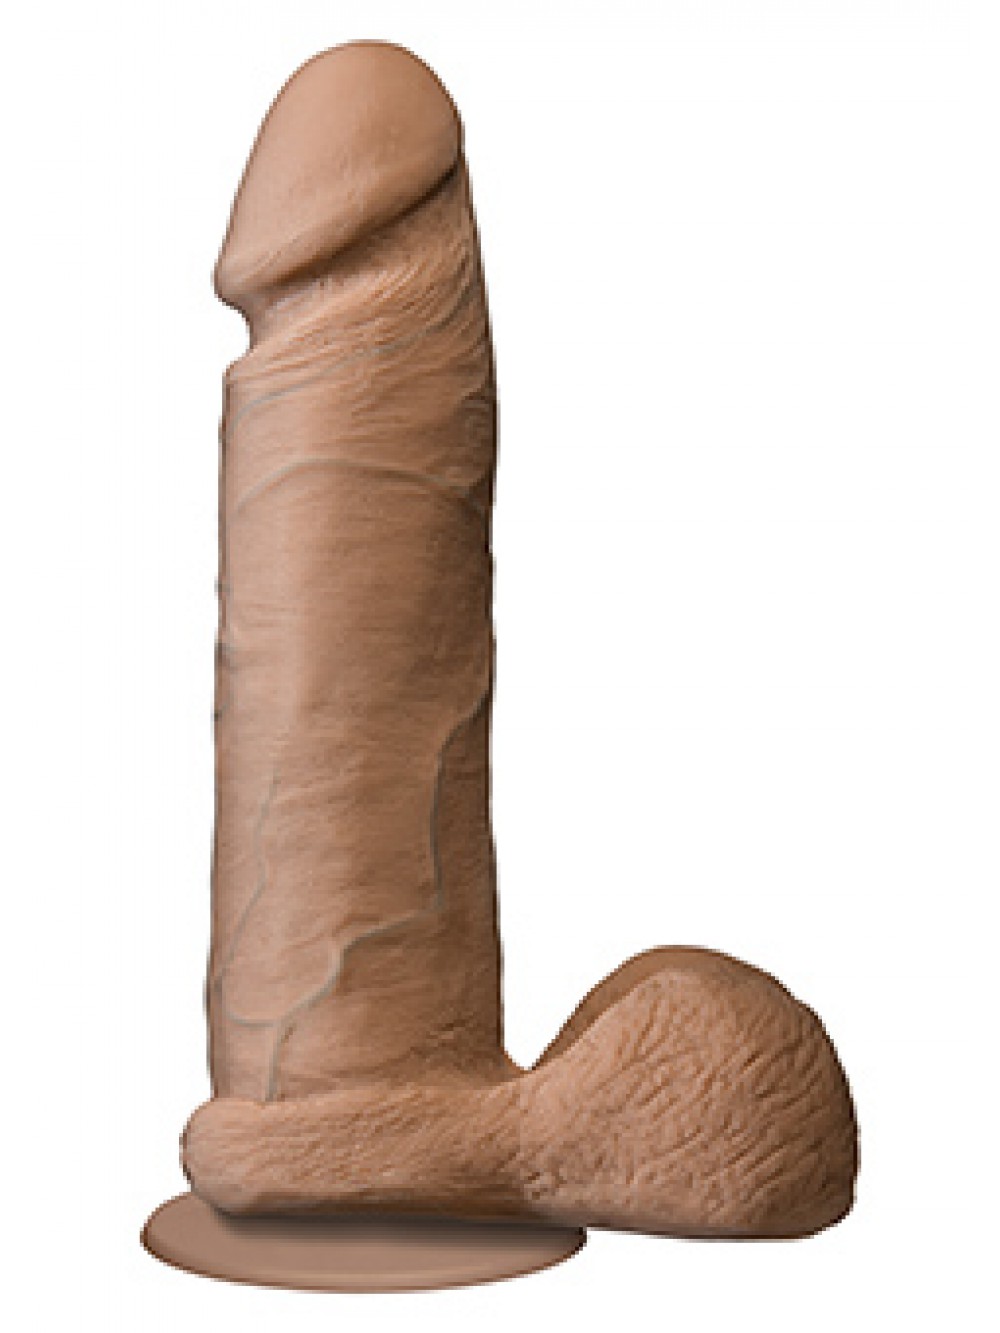 THE REALISTIC COCK UR3 8 INCH BROWN